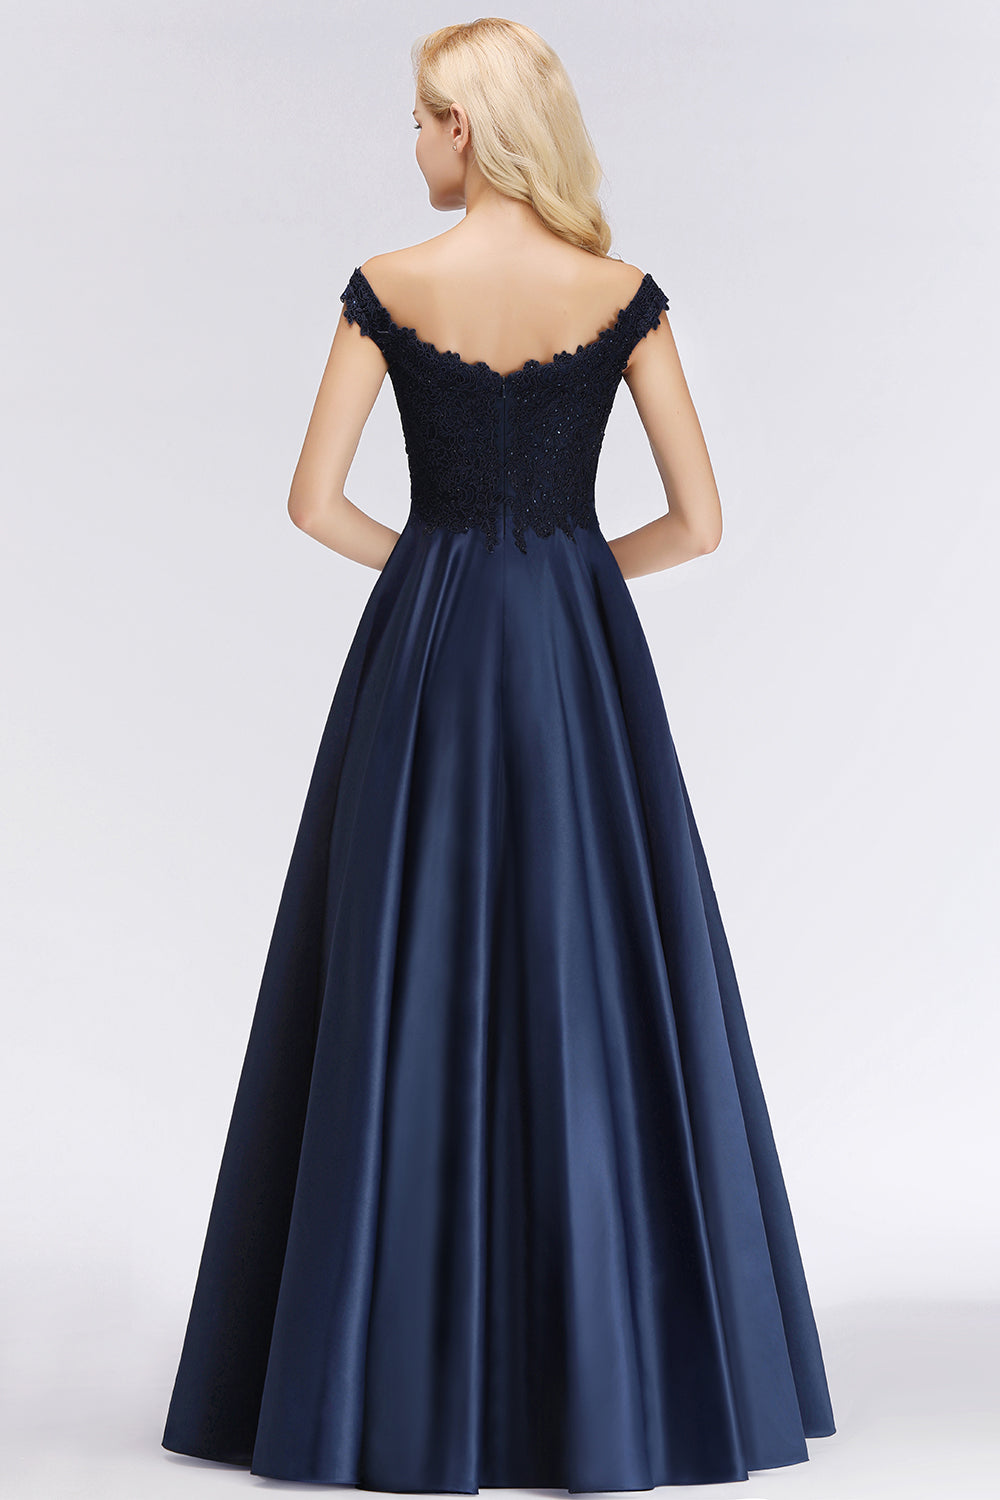 Elegant Off-the-Shoulder Ruffle Navy Lace Bridesmaid Dresses with Beads-27dress